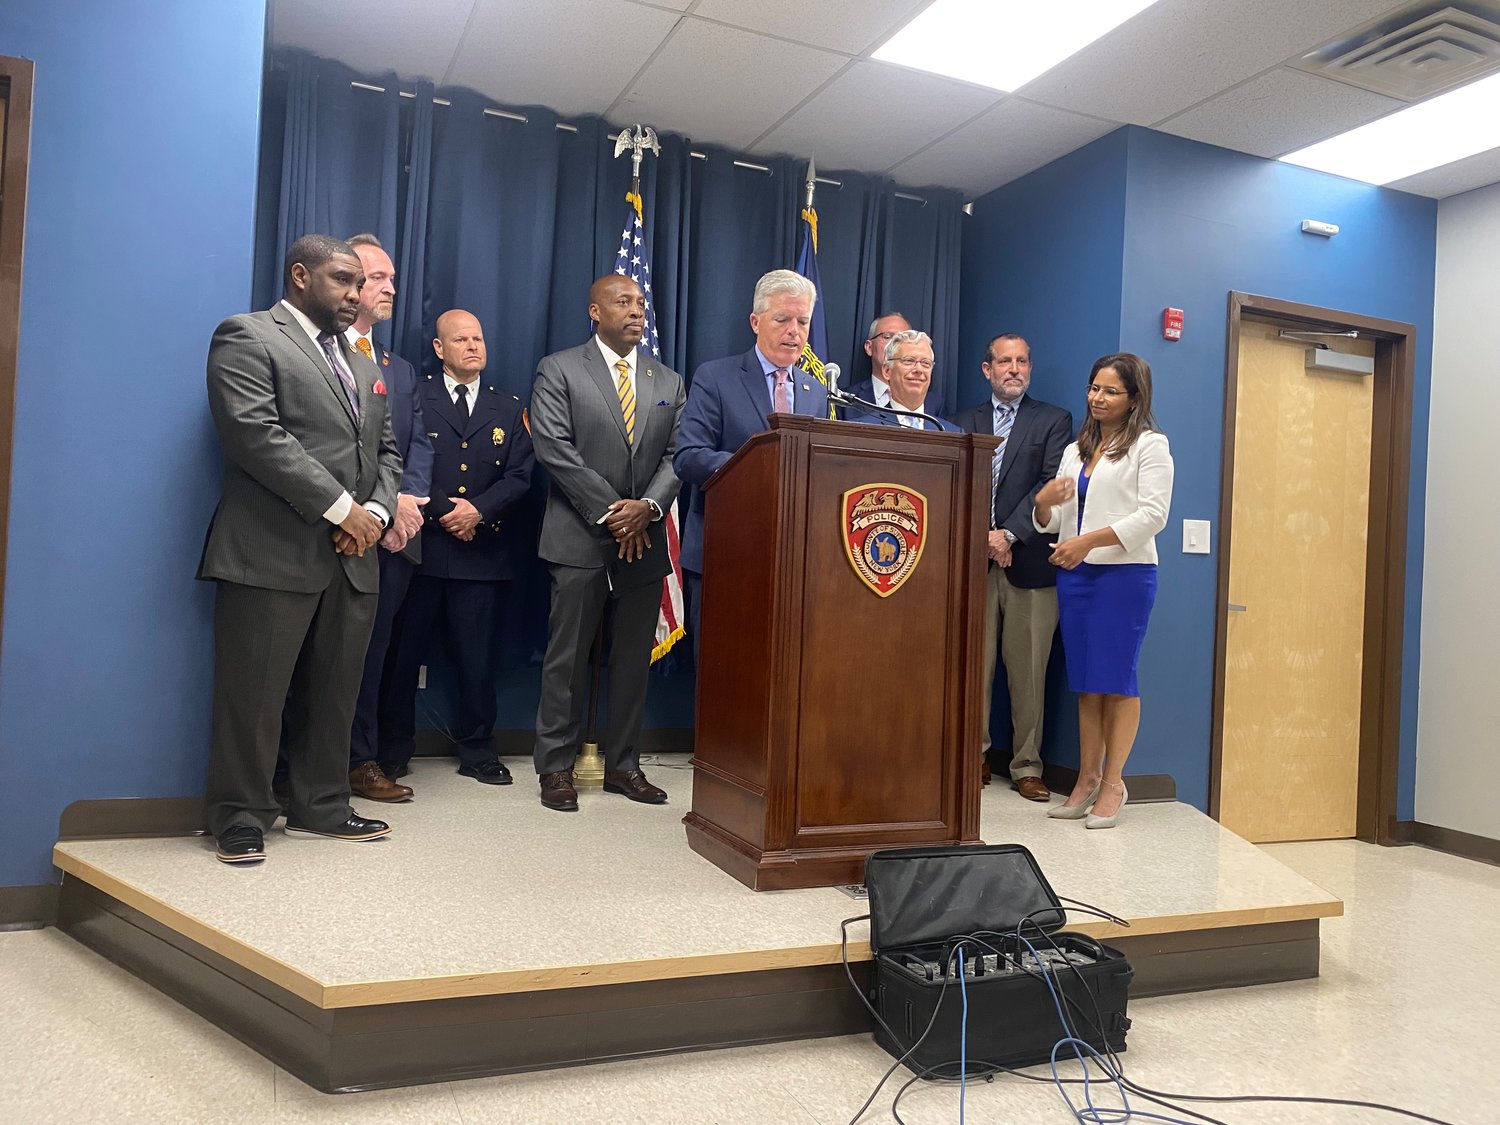 Suffolk County executive Steve Bellone speaks at a press conference detailing the county’s proactive approach to school threats.